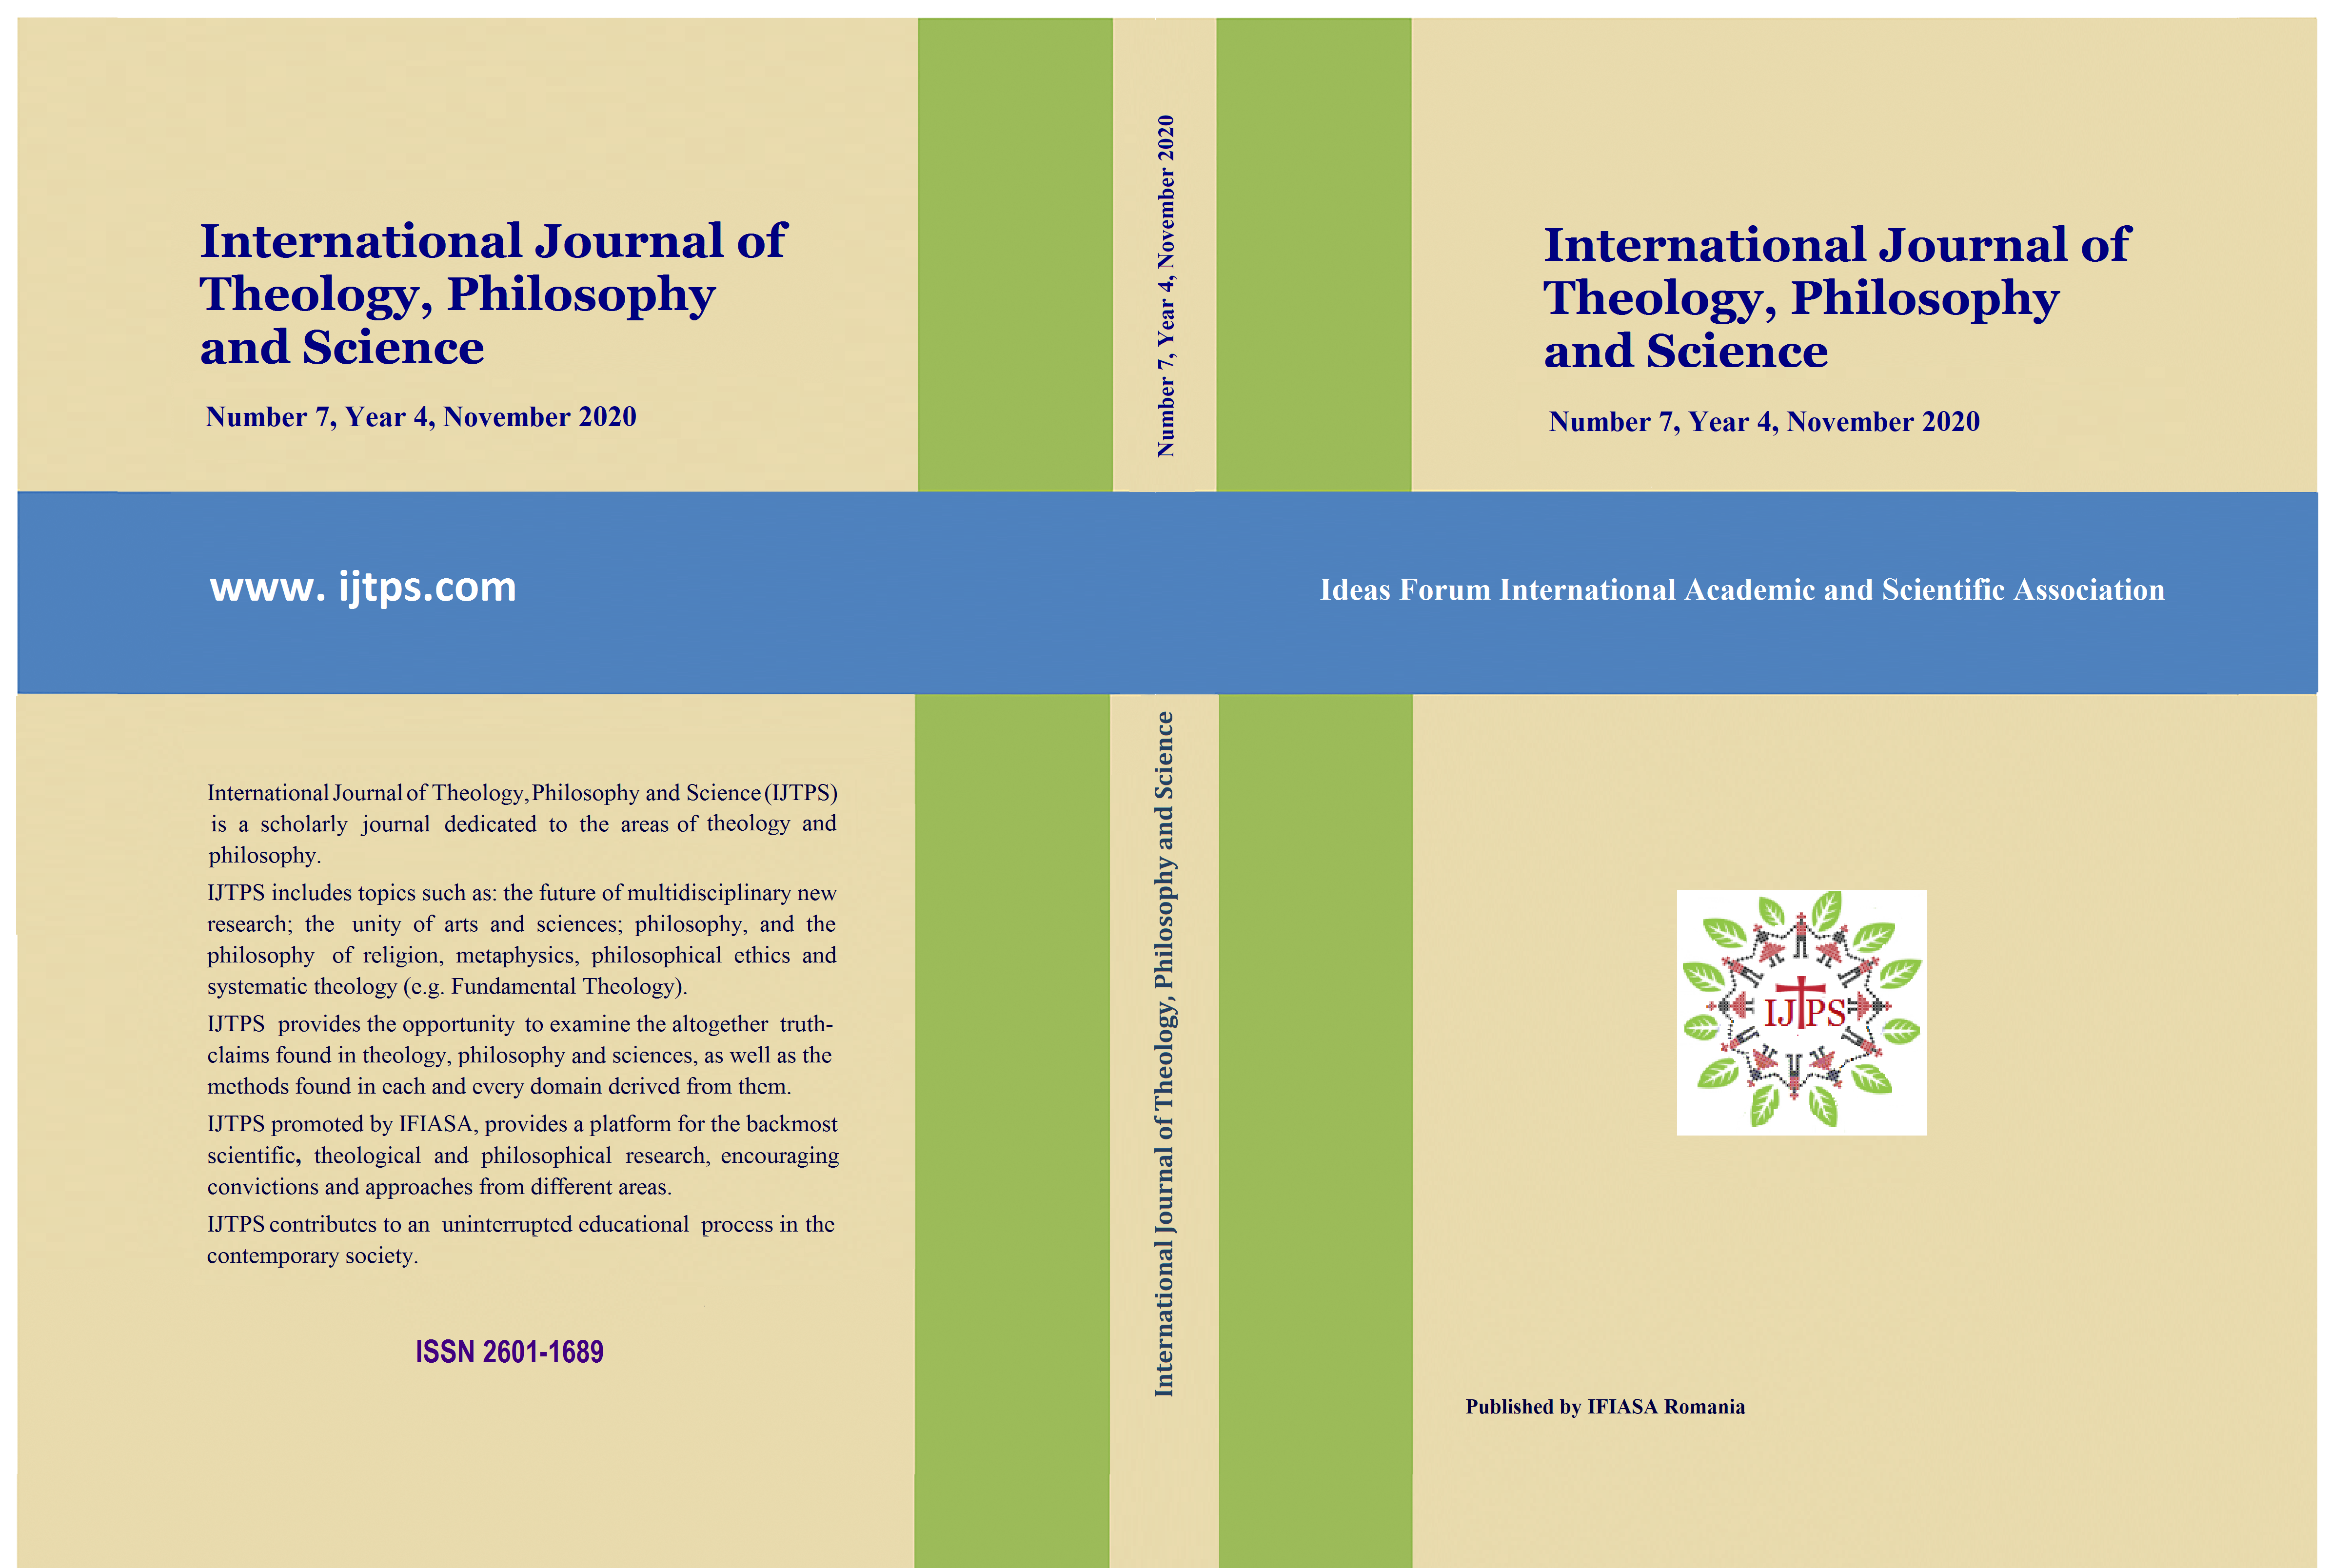 PHENOMENOLOGY AND HERMENEUTICS OF REVELATION. TWO-VOICE OF PAUL RICOEUR AND JEAN-LUC MARION Cover Image